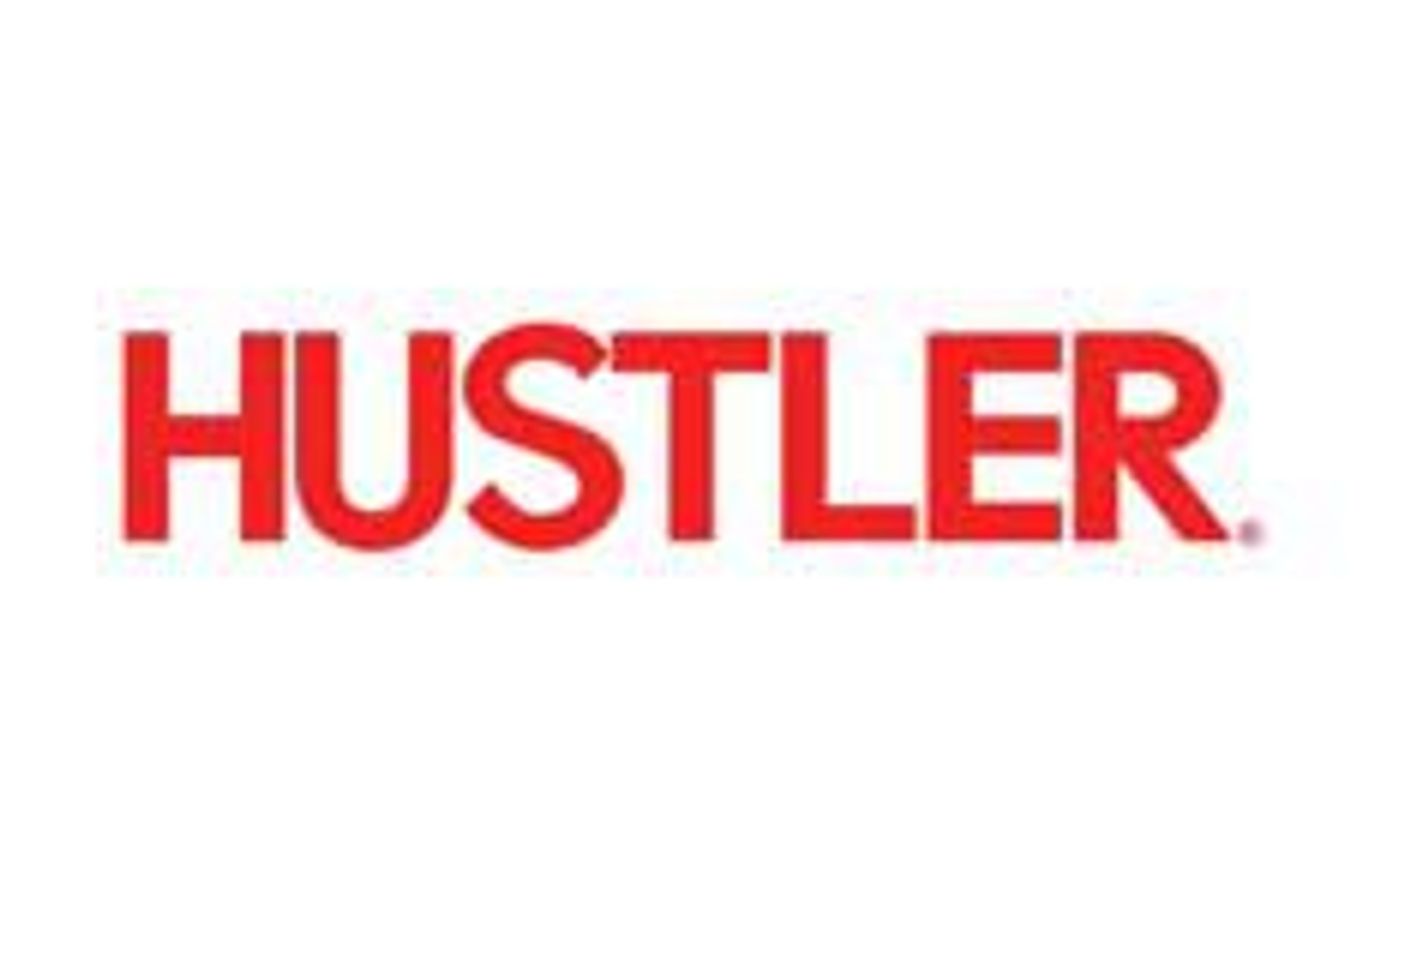 Hustler Toys To Debut New 'Pussies'